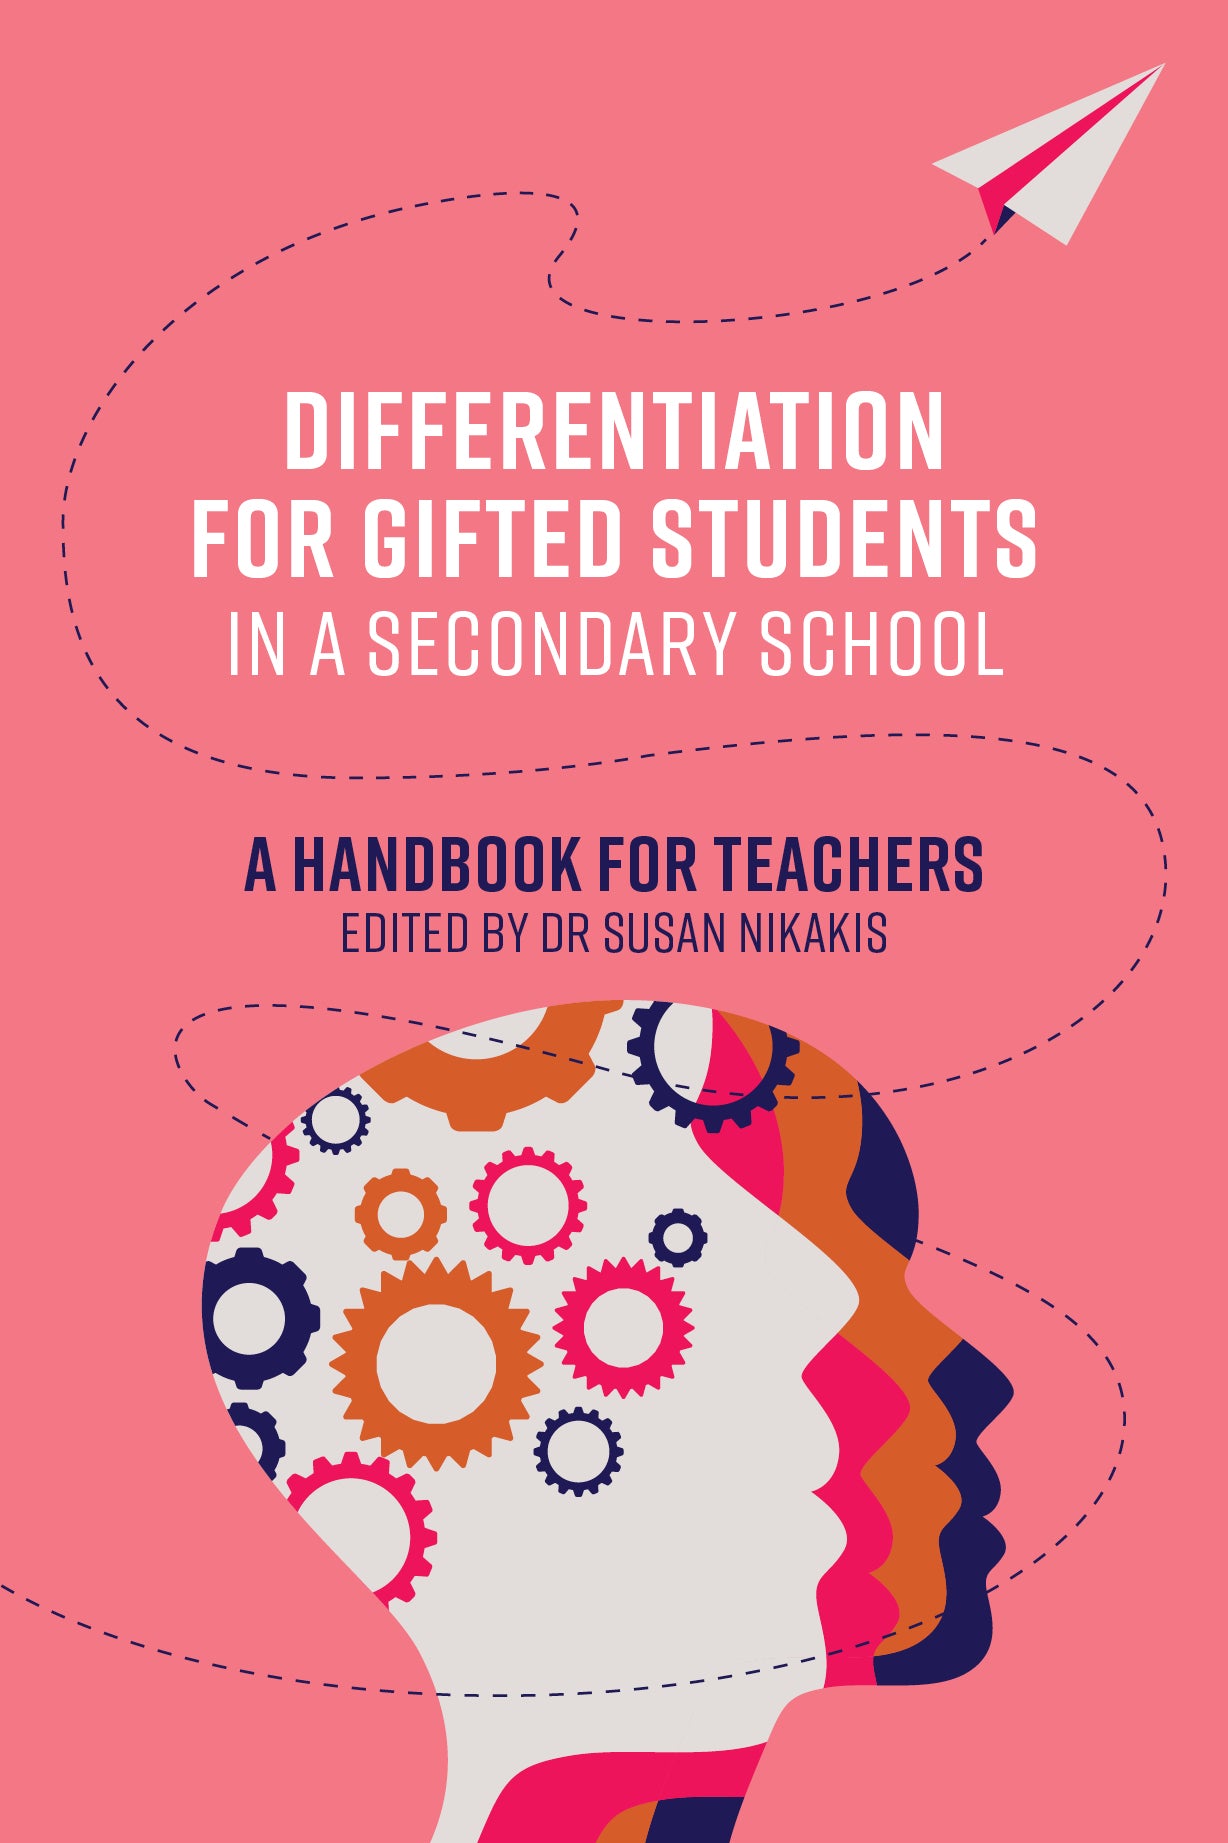 Differentiation for Gifted Students in a Secondary School